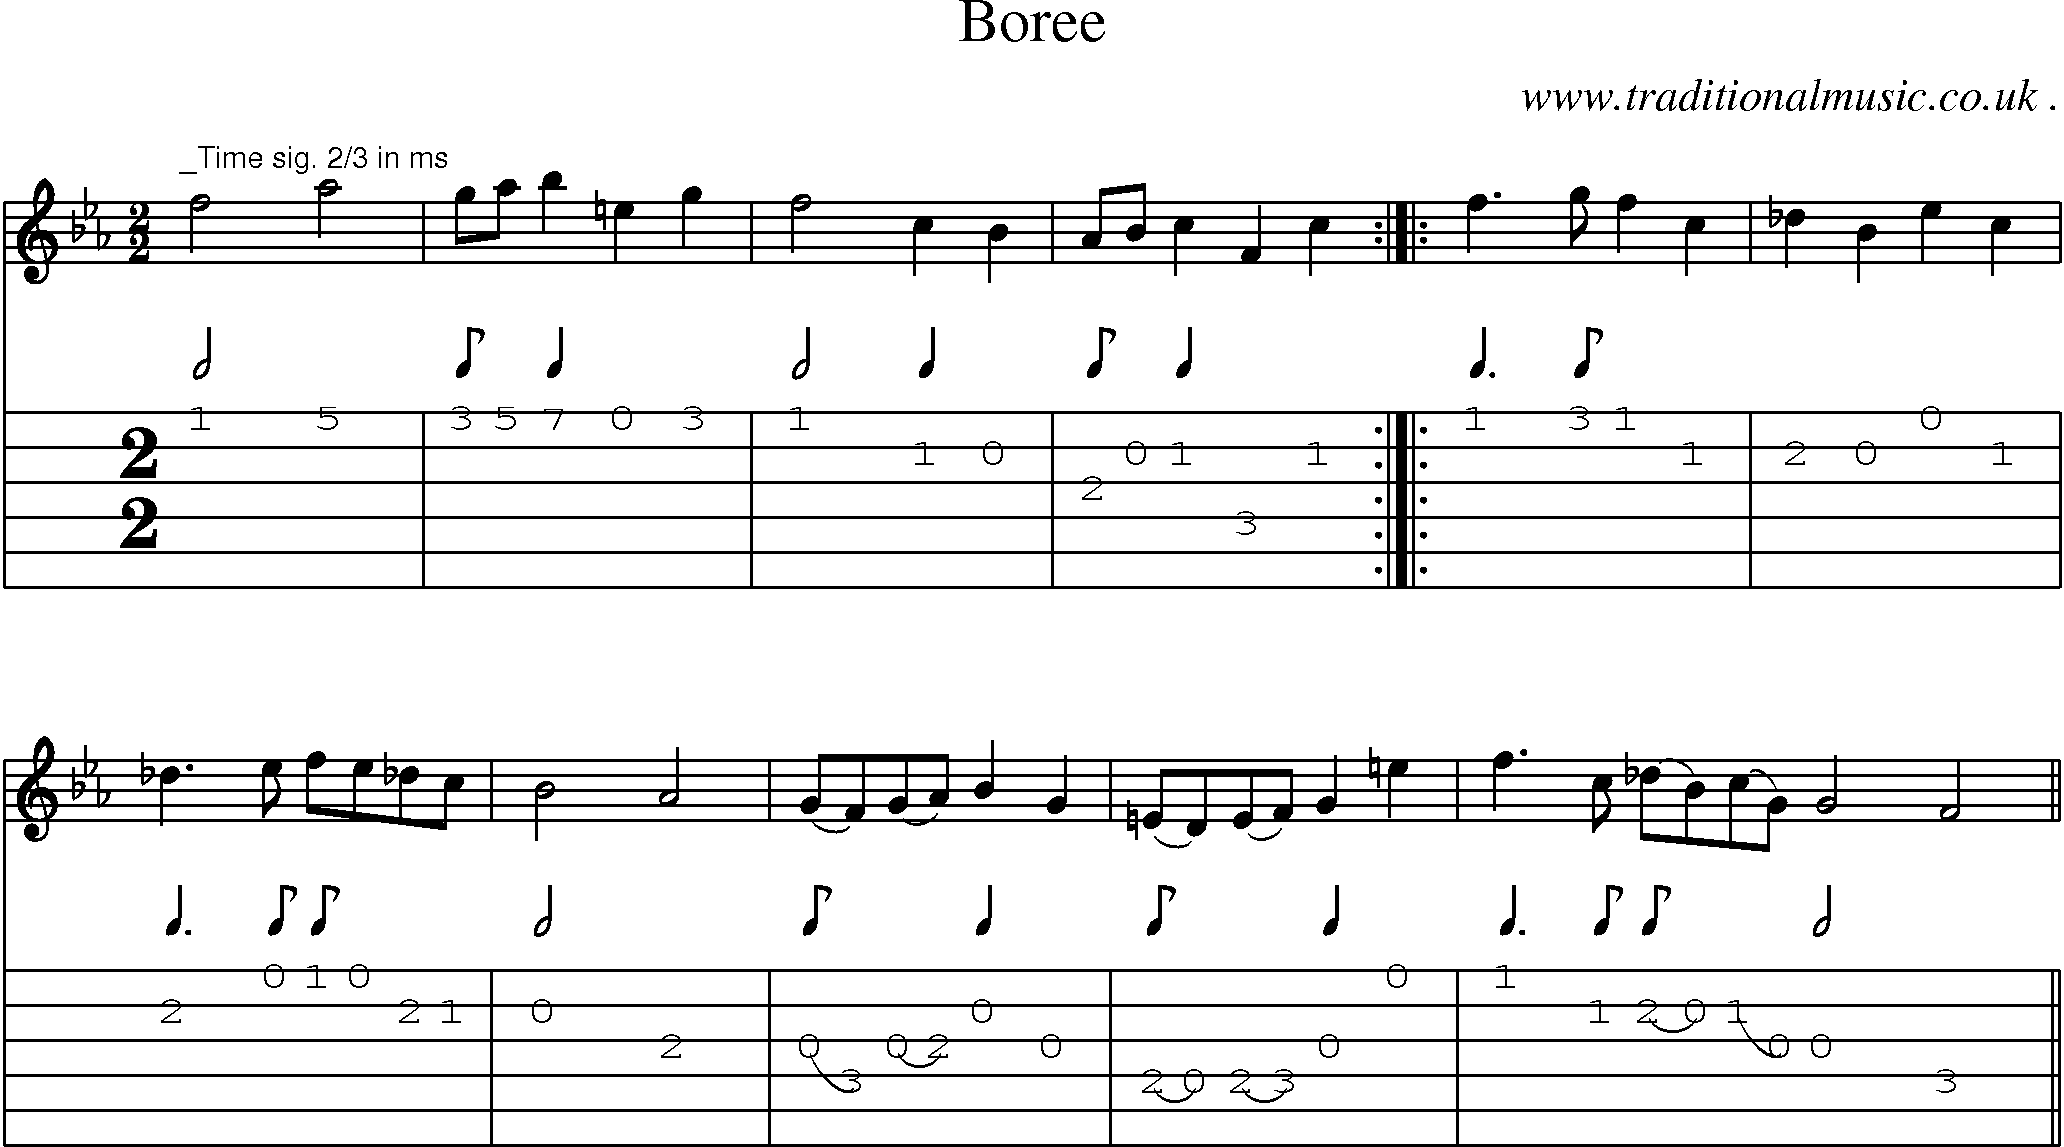 Sheet-Music and Guitar Tabs for Boree